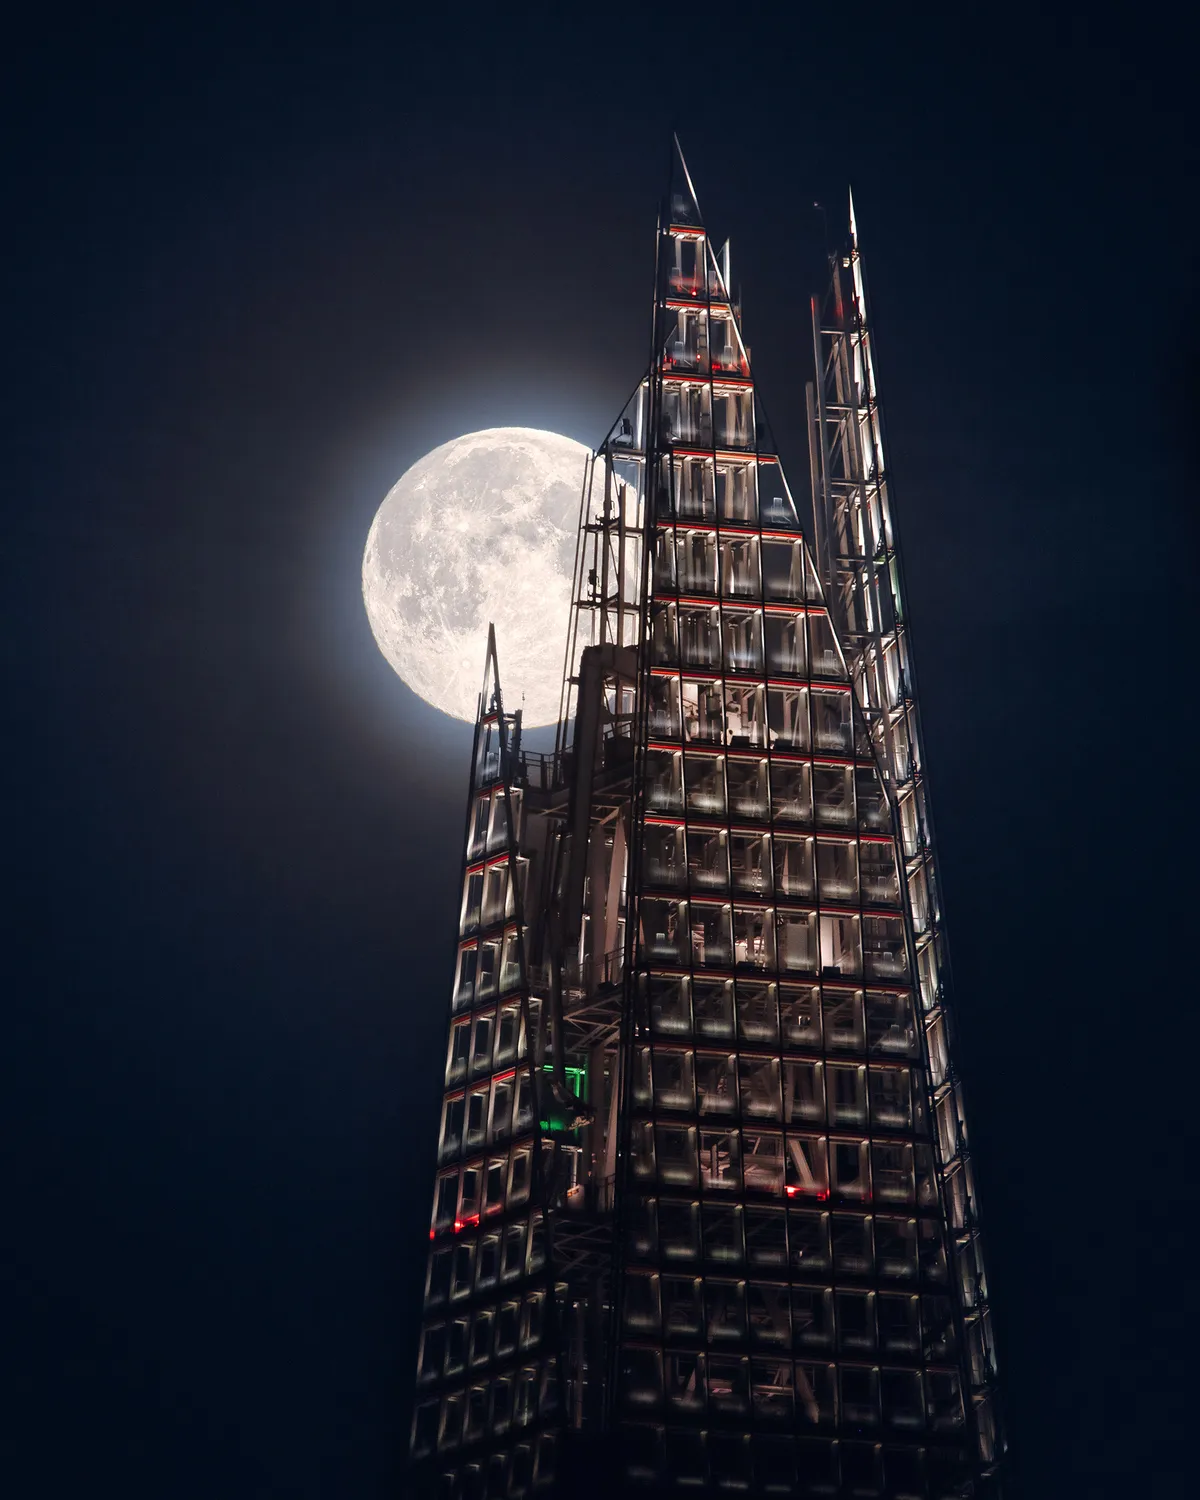 The Moon and the Shard Mathew Browne (UK). Category: Our Moon. Equipment: Nikon D850 camera, 550 mm f/10 lens, ISO 320, 3 x 1/80-second exposures